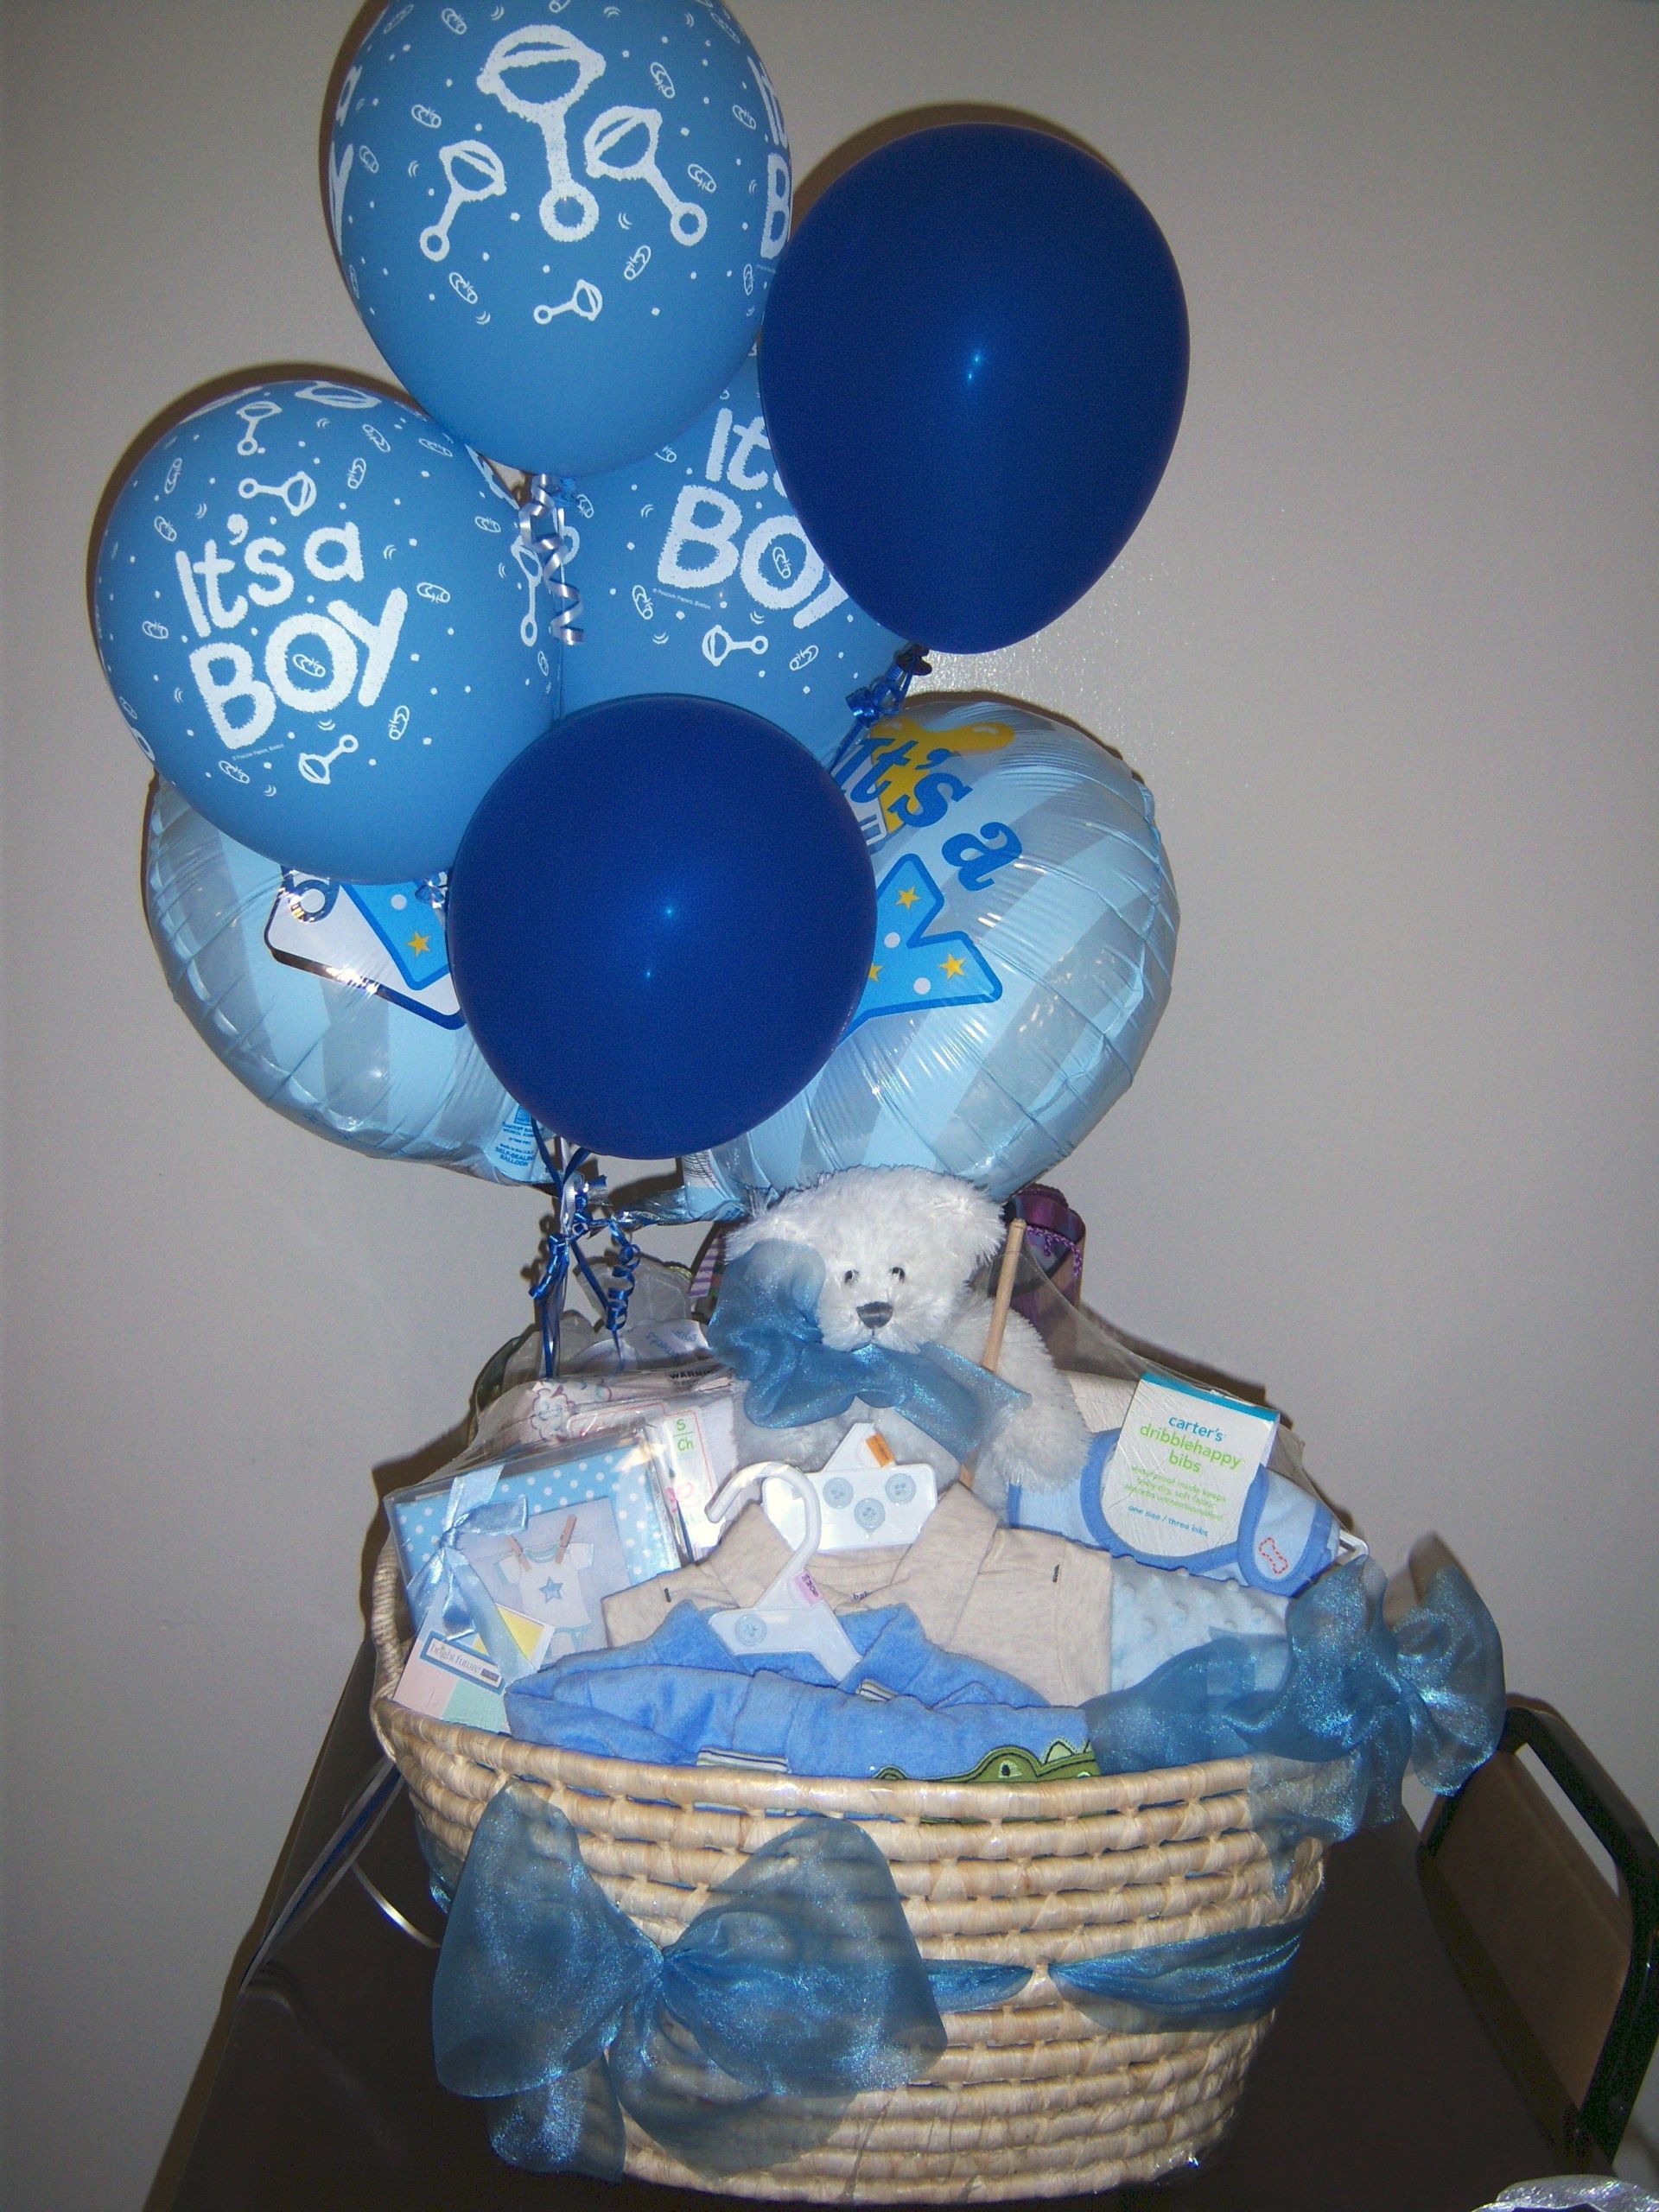 Baby Shower Gift Wrapping Ideas Pinterest
 Baby Boy Gift Basket Gift Wrapping Pinterest